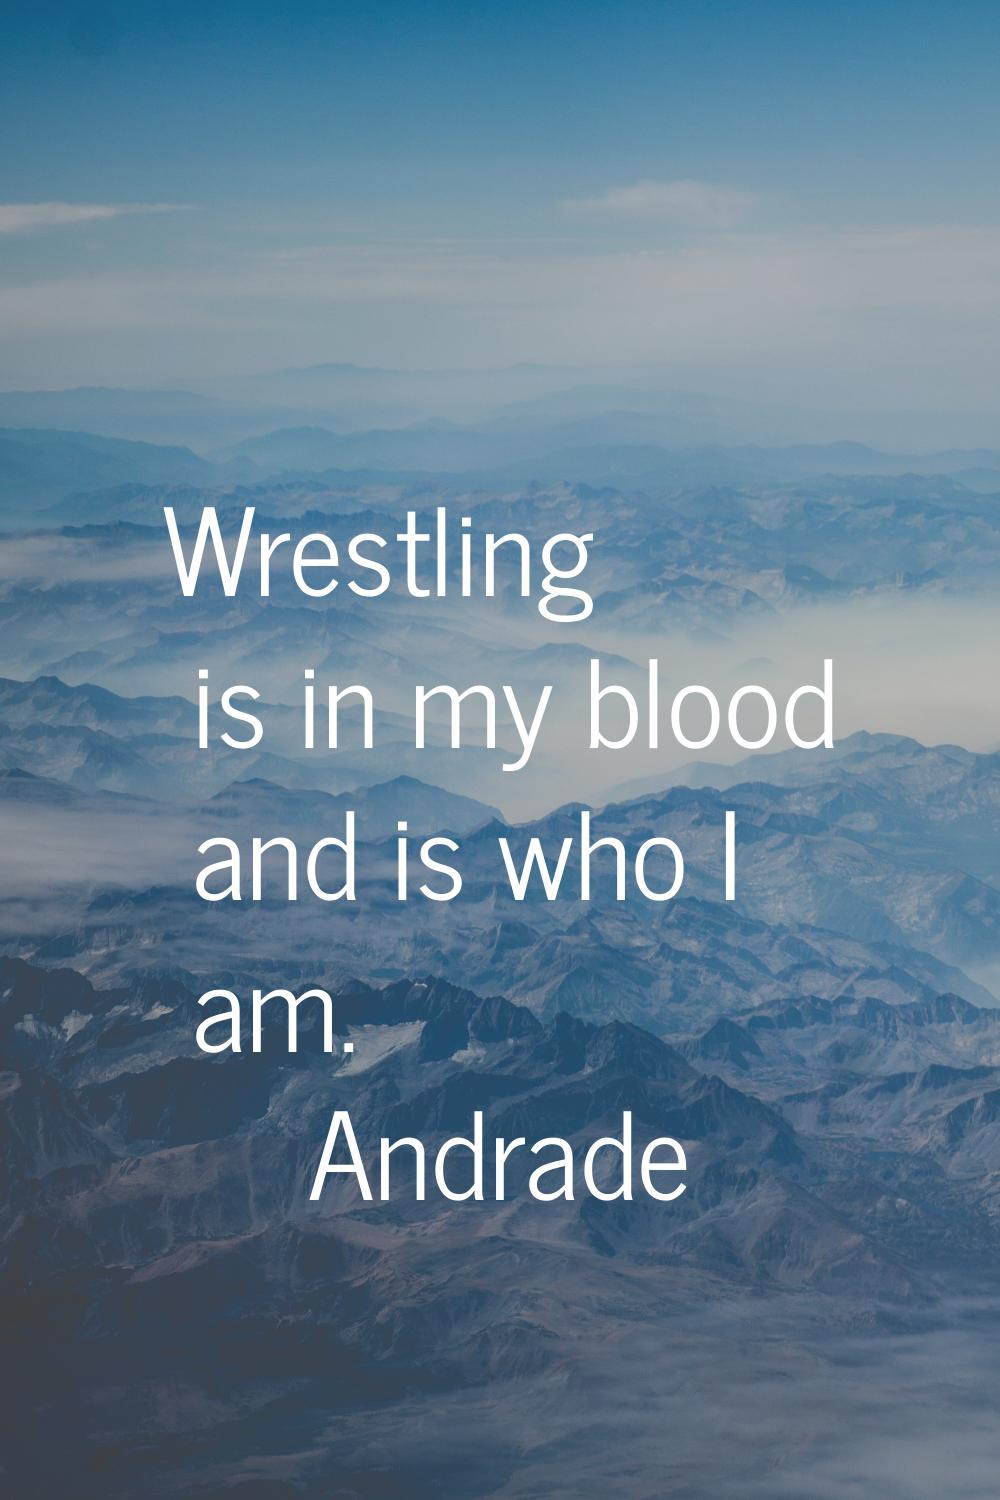 Wrestling is in my blood and is who I am.